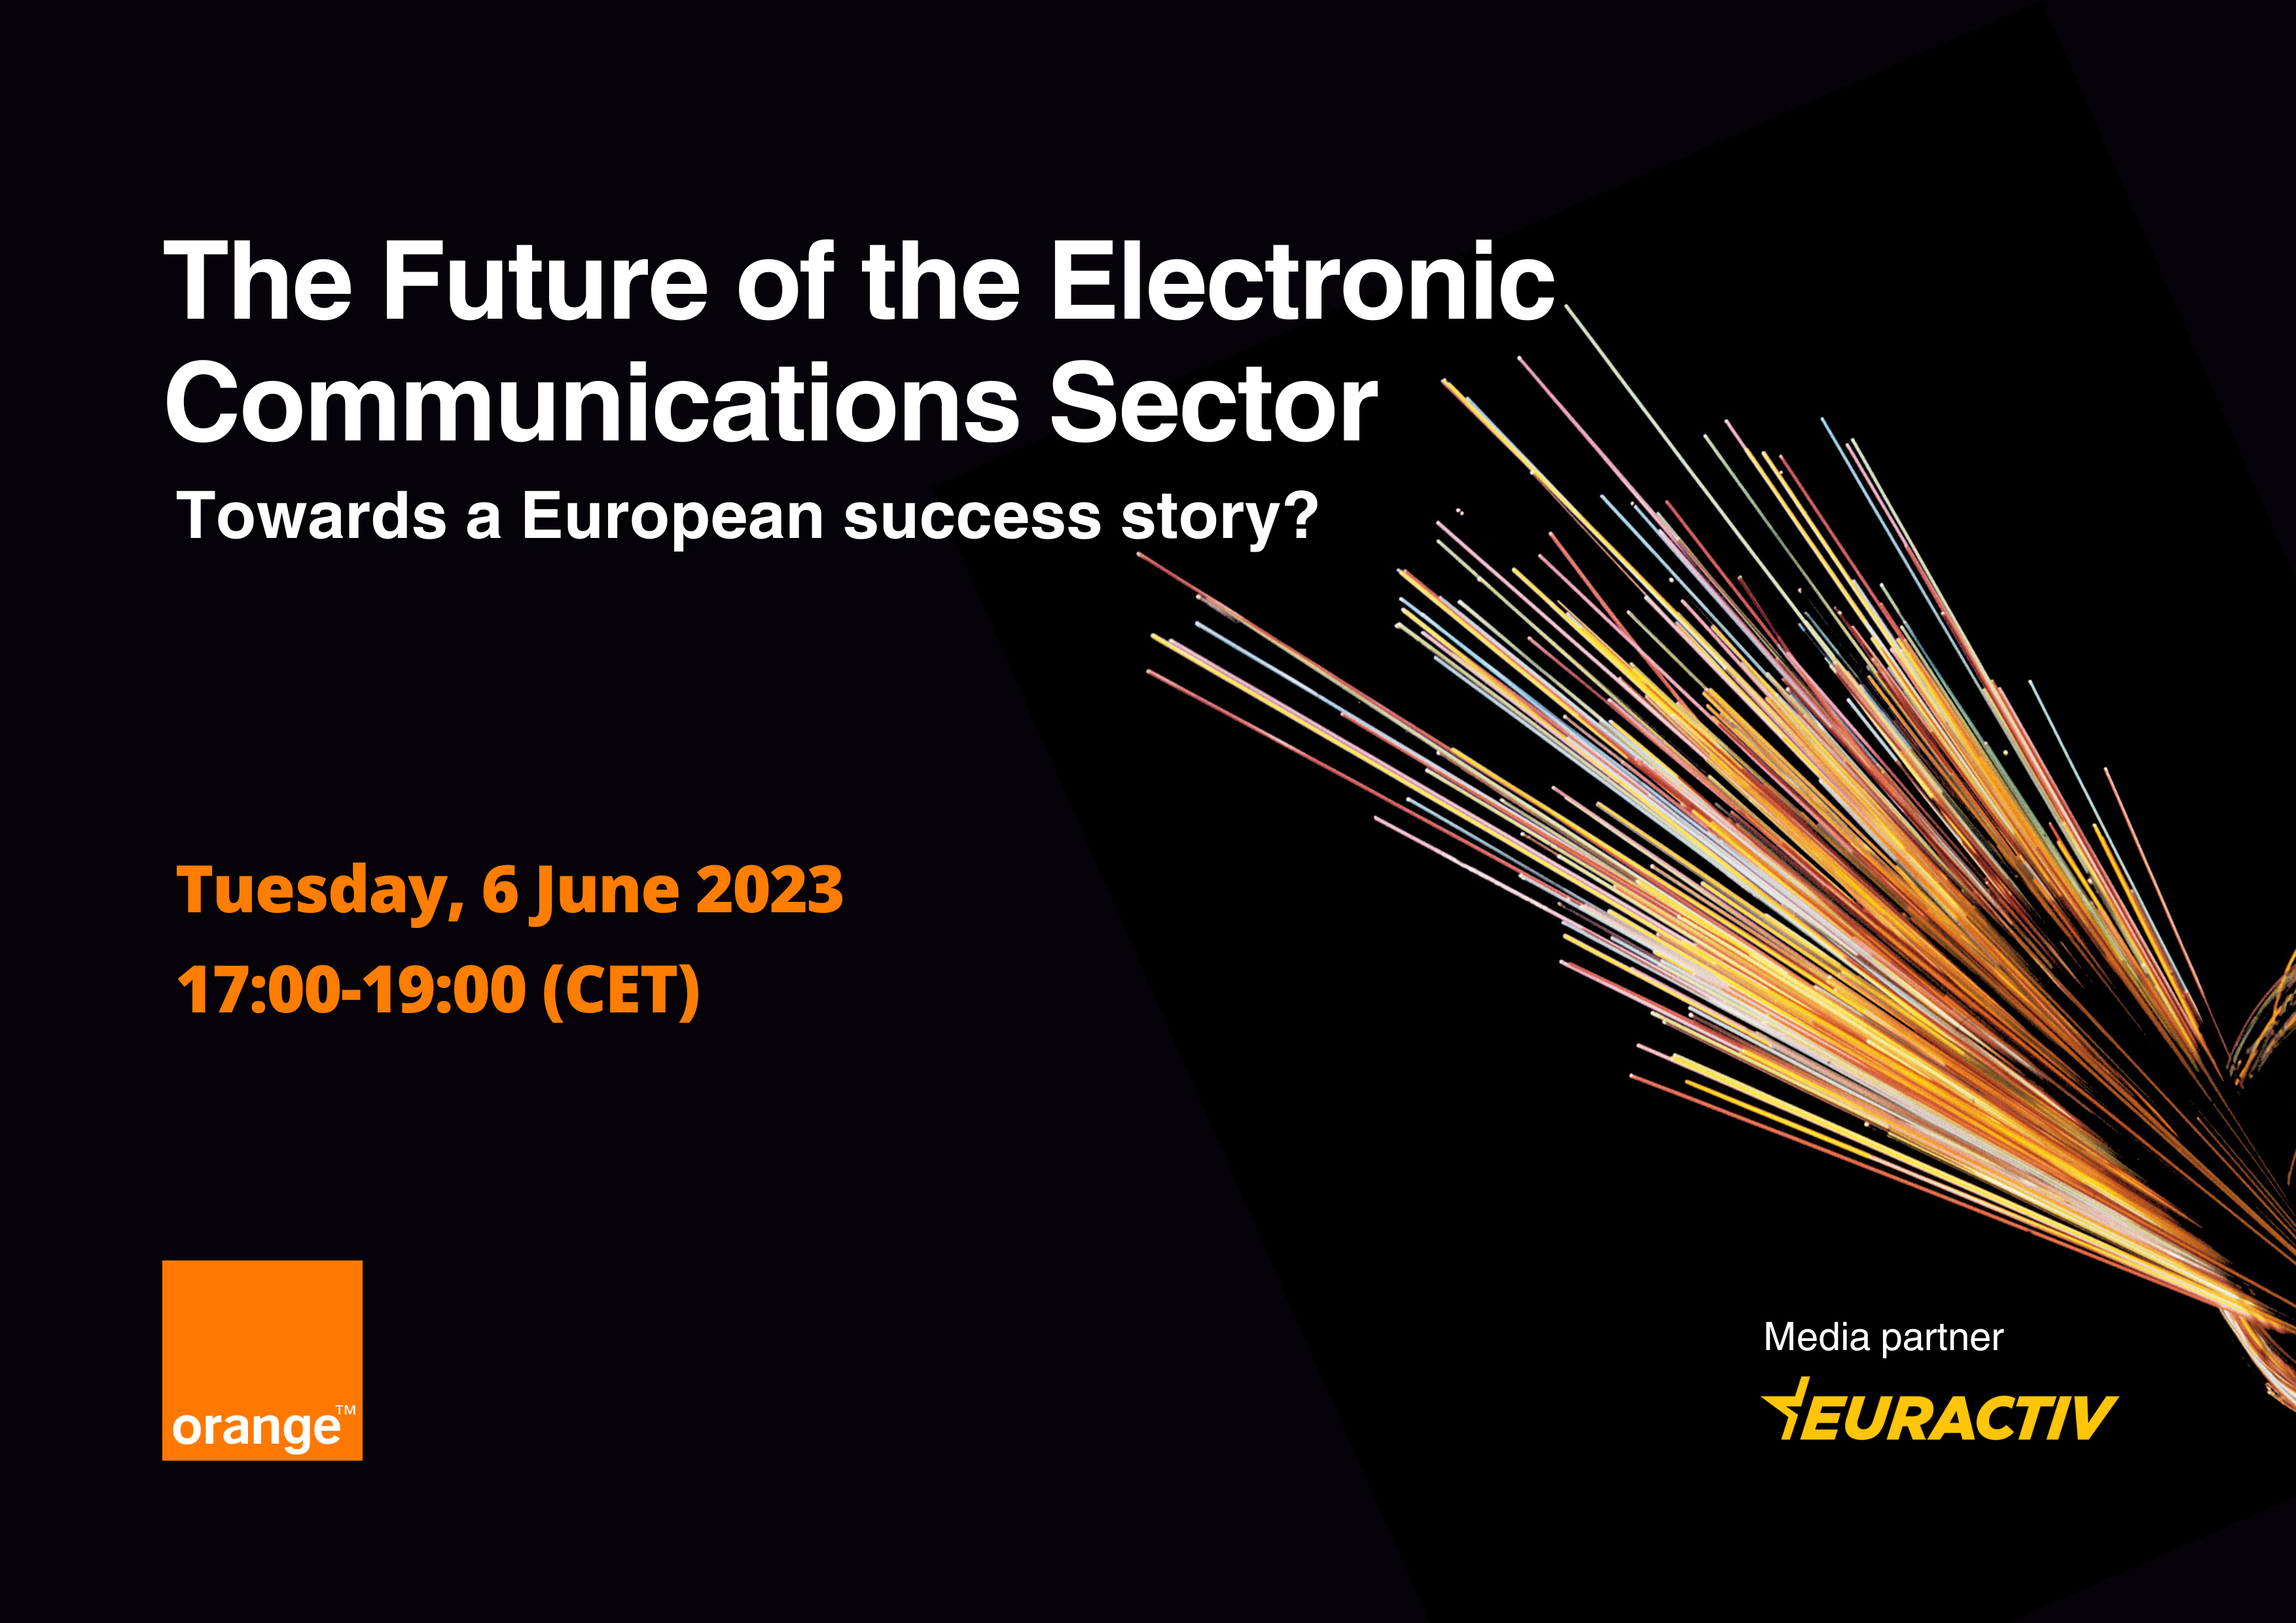 Media Partnership: The Future of the Electronic Communications Sector - Towards a European success story?